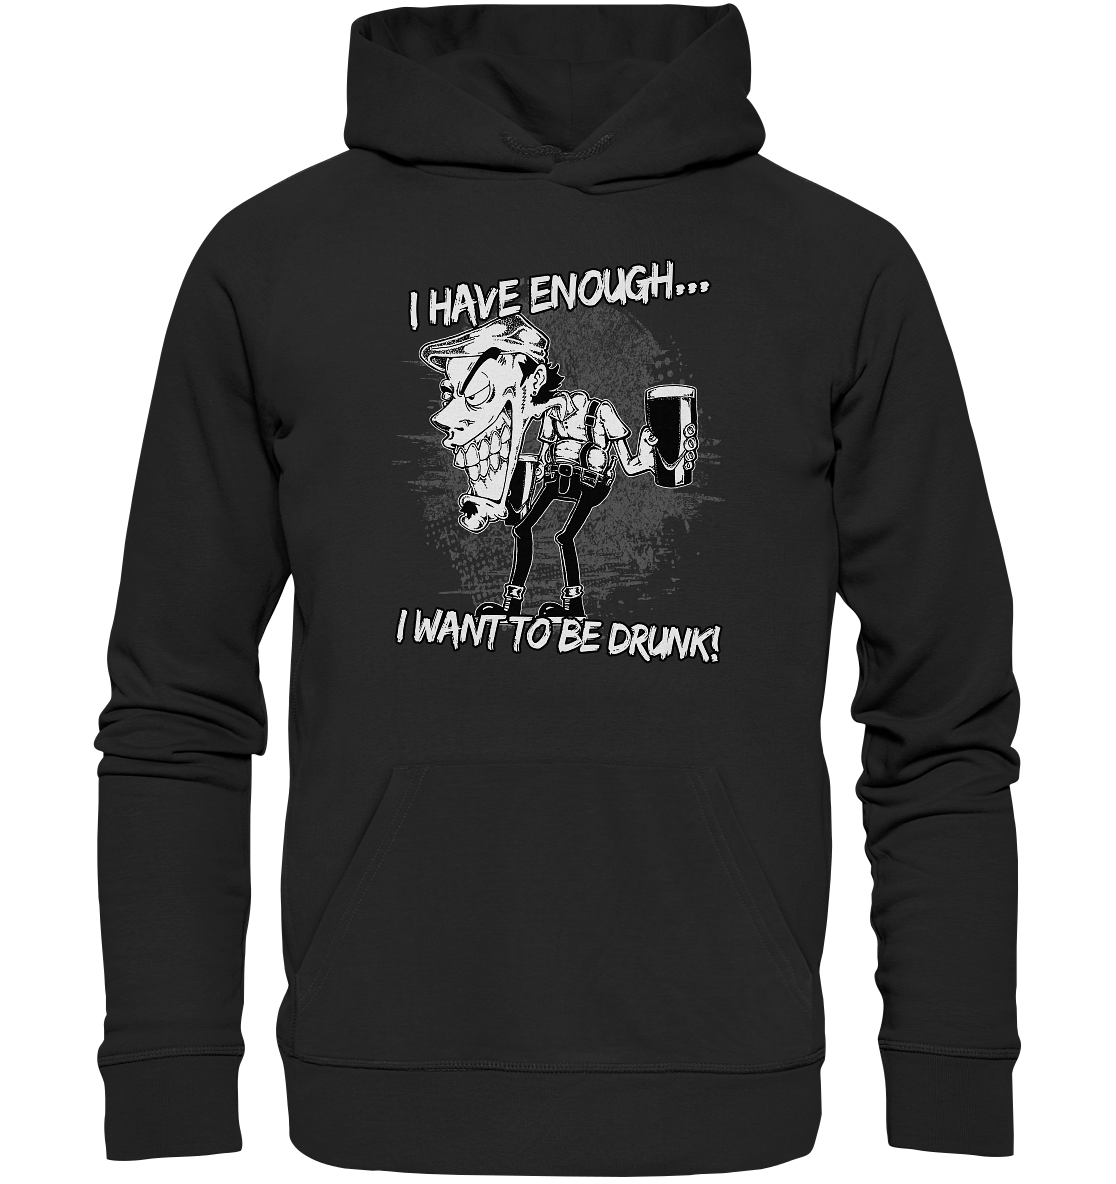 I Have Enough... "I Want To Be Drunk!" - Premium Unisex Hoodie